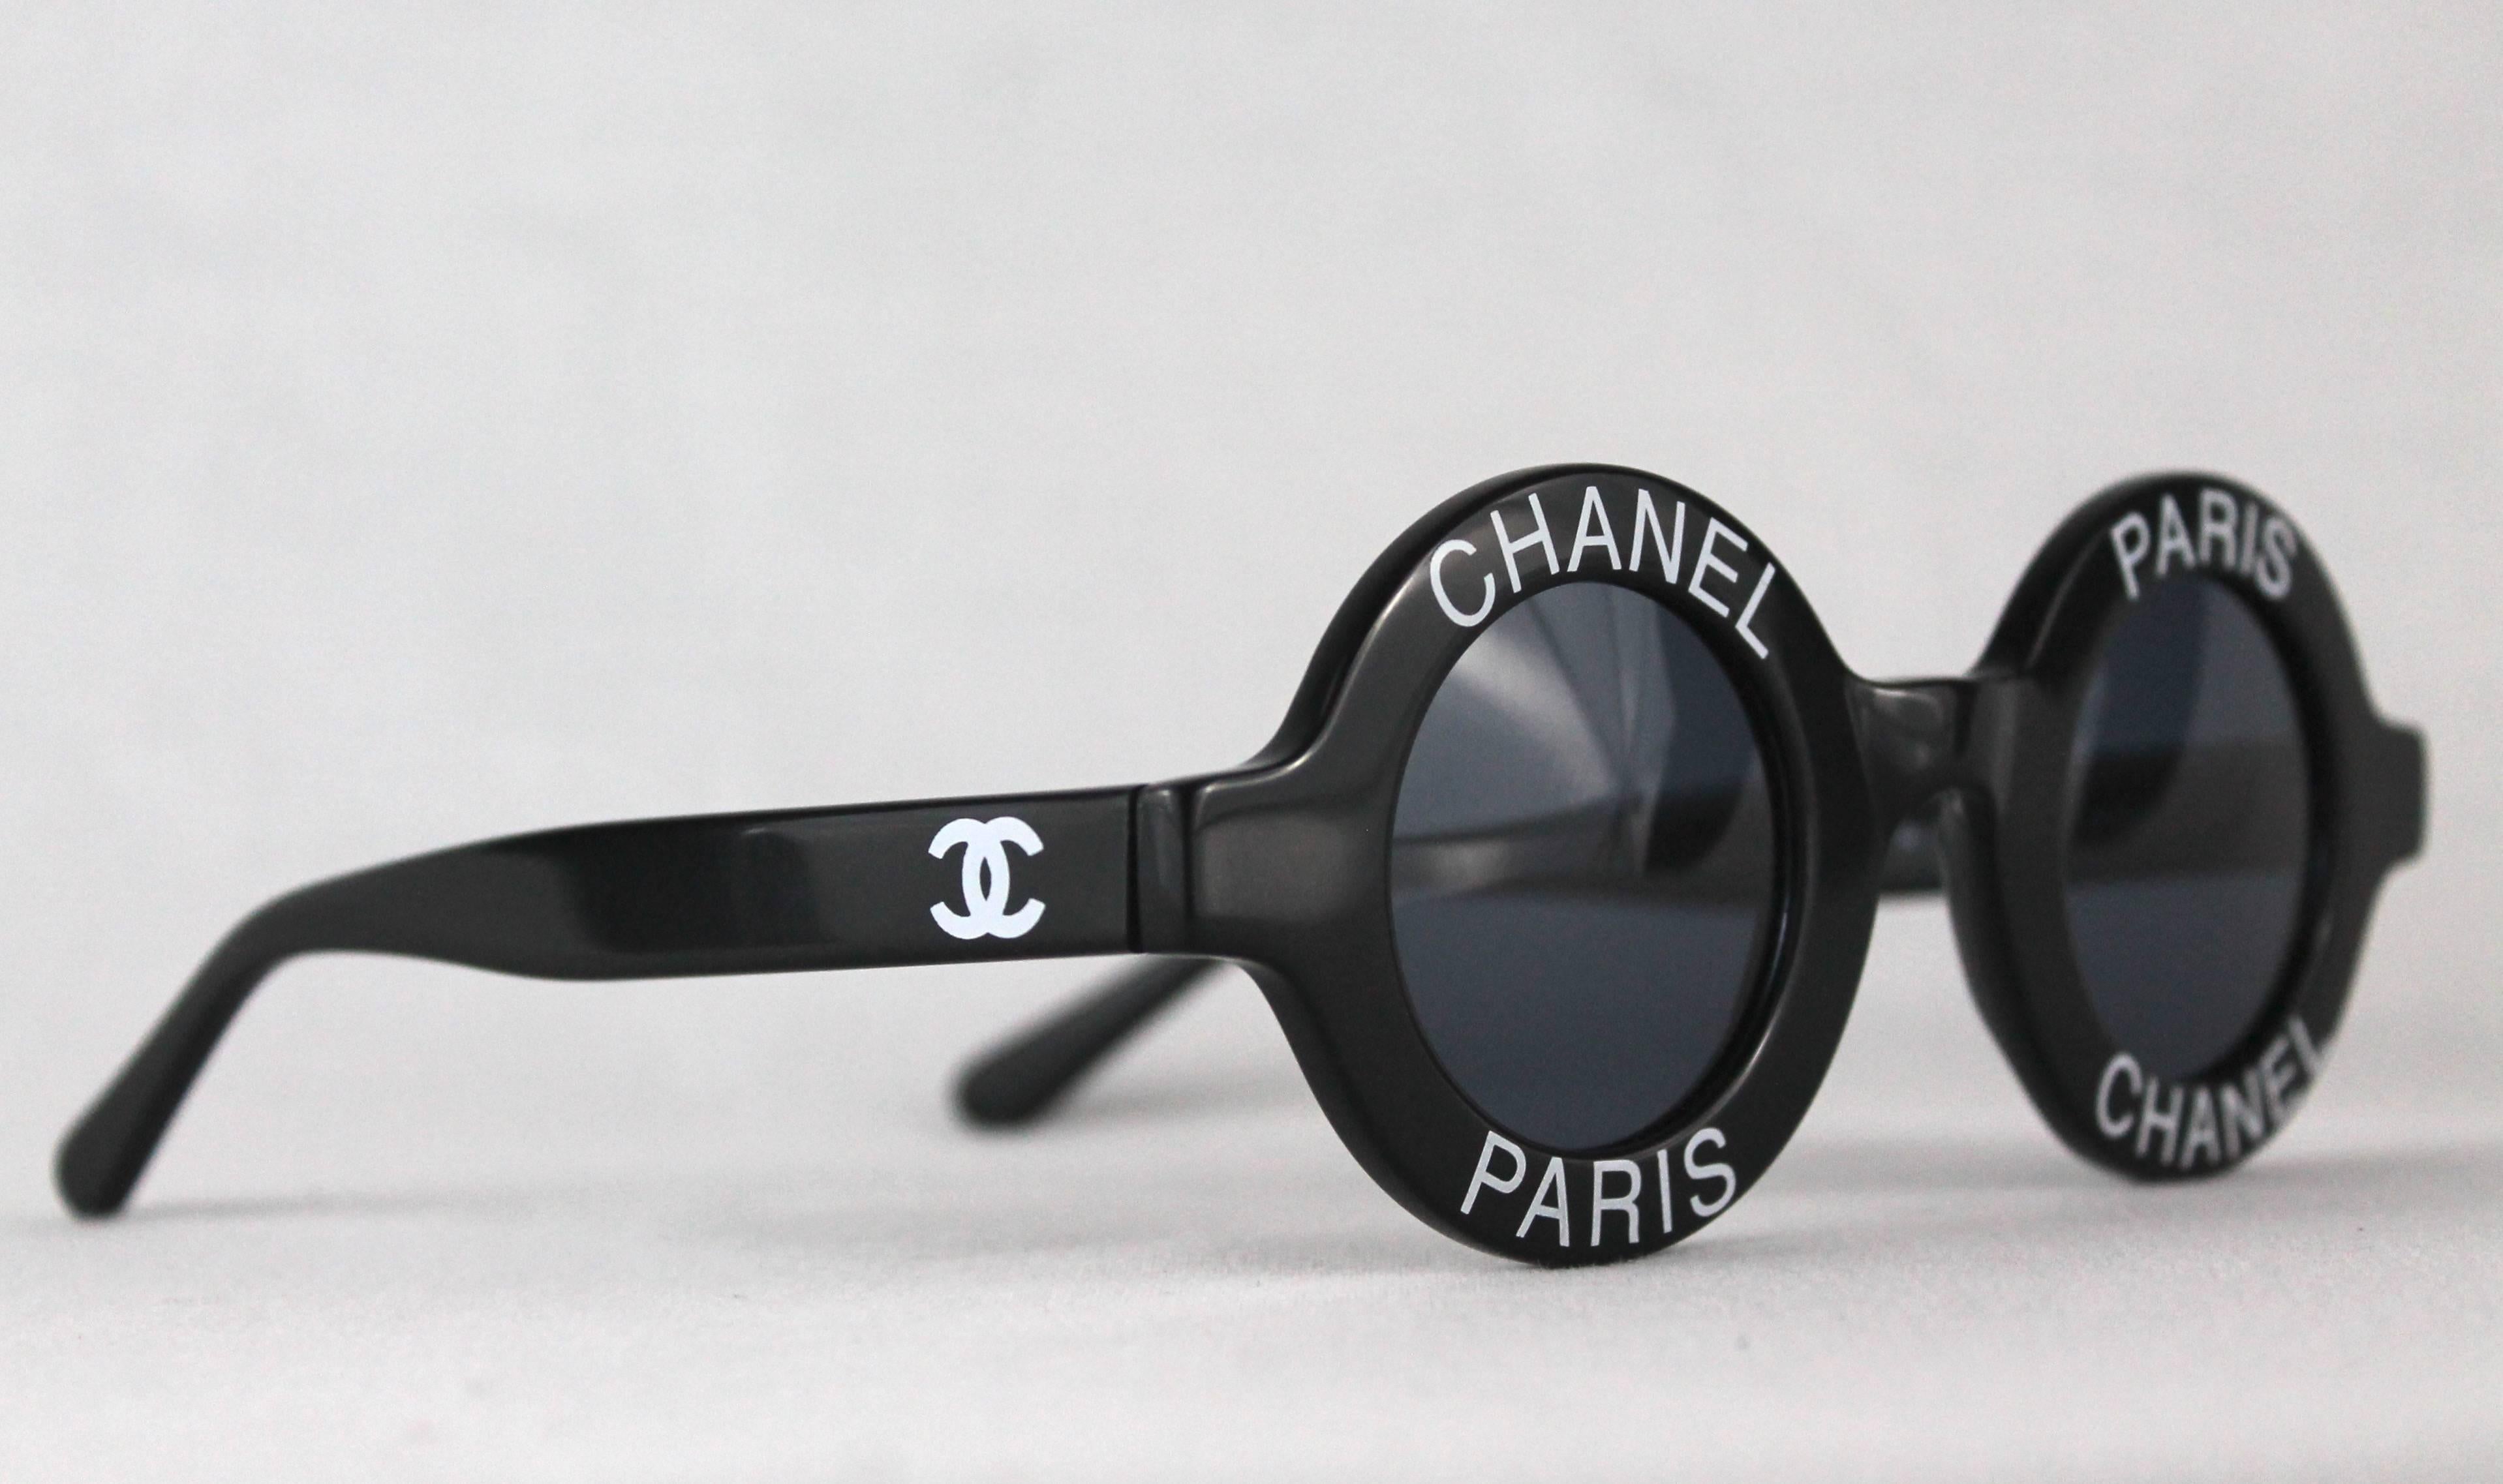 Chanel Logo Round Sunglasses from SS93
-Incredibly rare and iconic shades from Chanel seen on the Spring Summer 1993 runway
-Features brand's logo on each lens
-Style has been made famous by notable wearers 
-Comes with non-branded sunglass case
